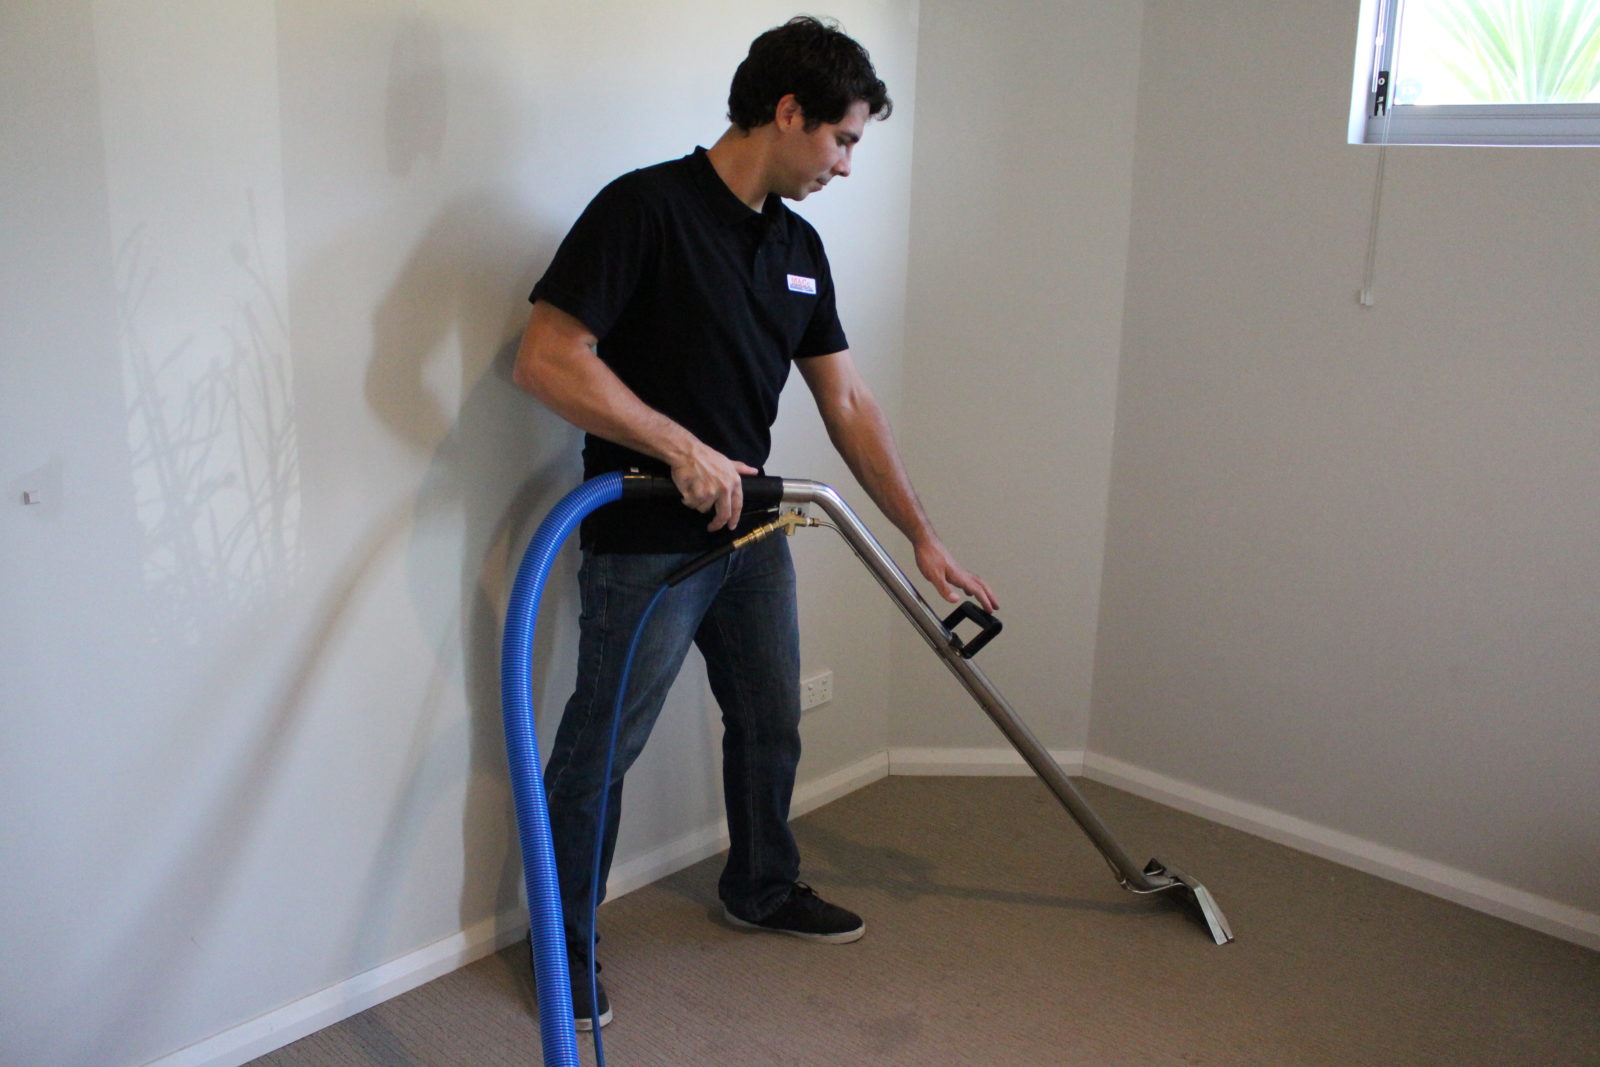 M&Co Carpet Cleaning Services